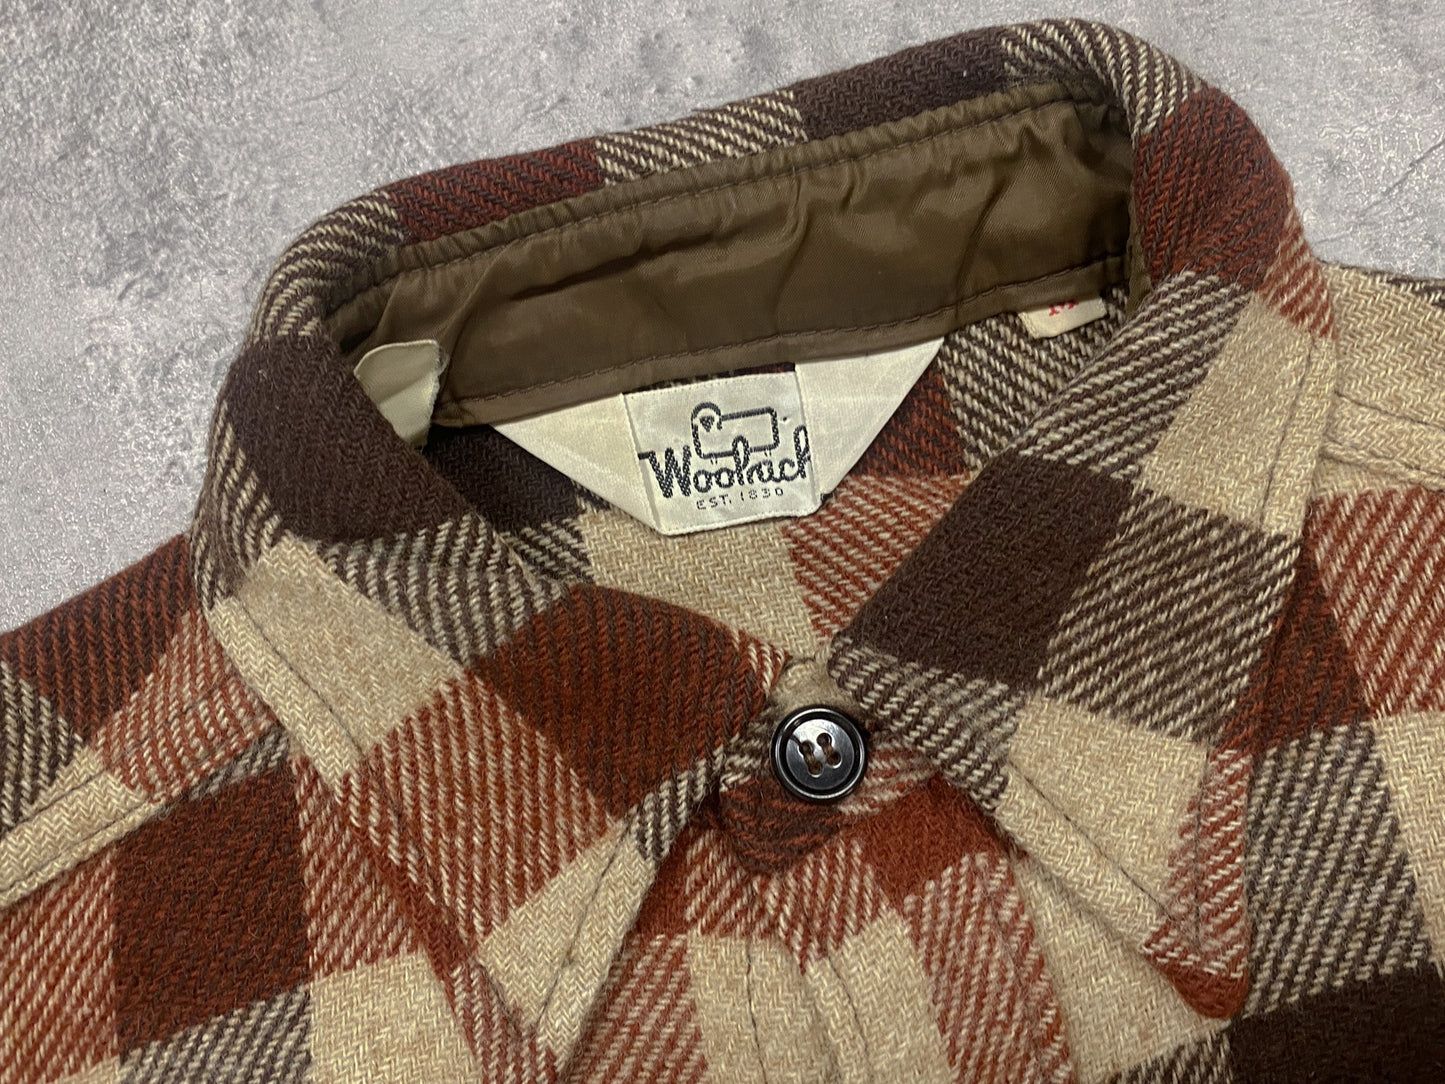 Woolrich  Checked Shirt vintage 60-70s